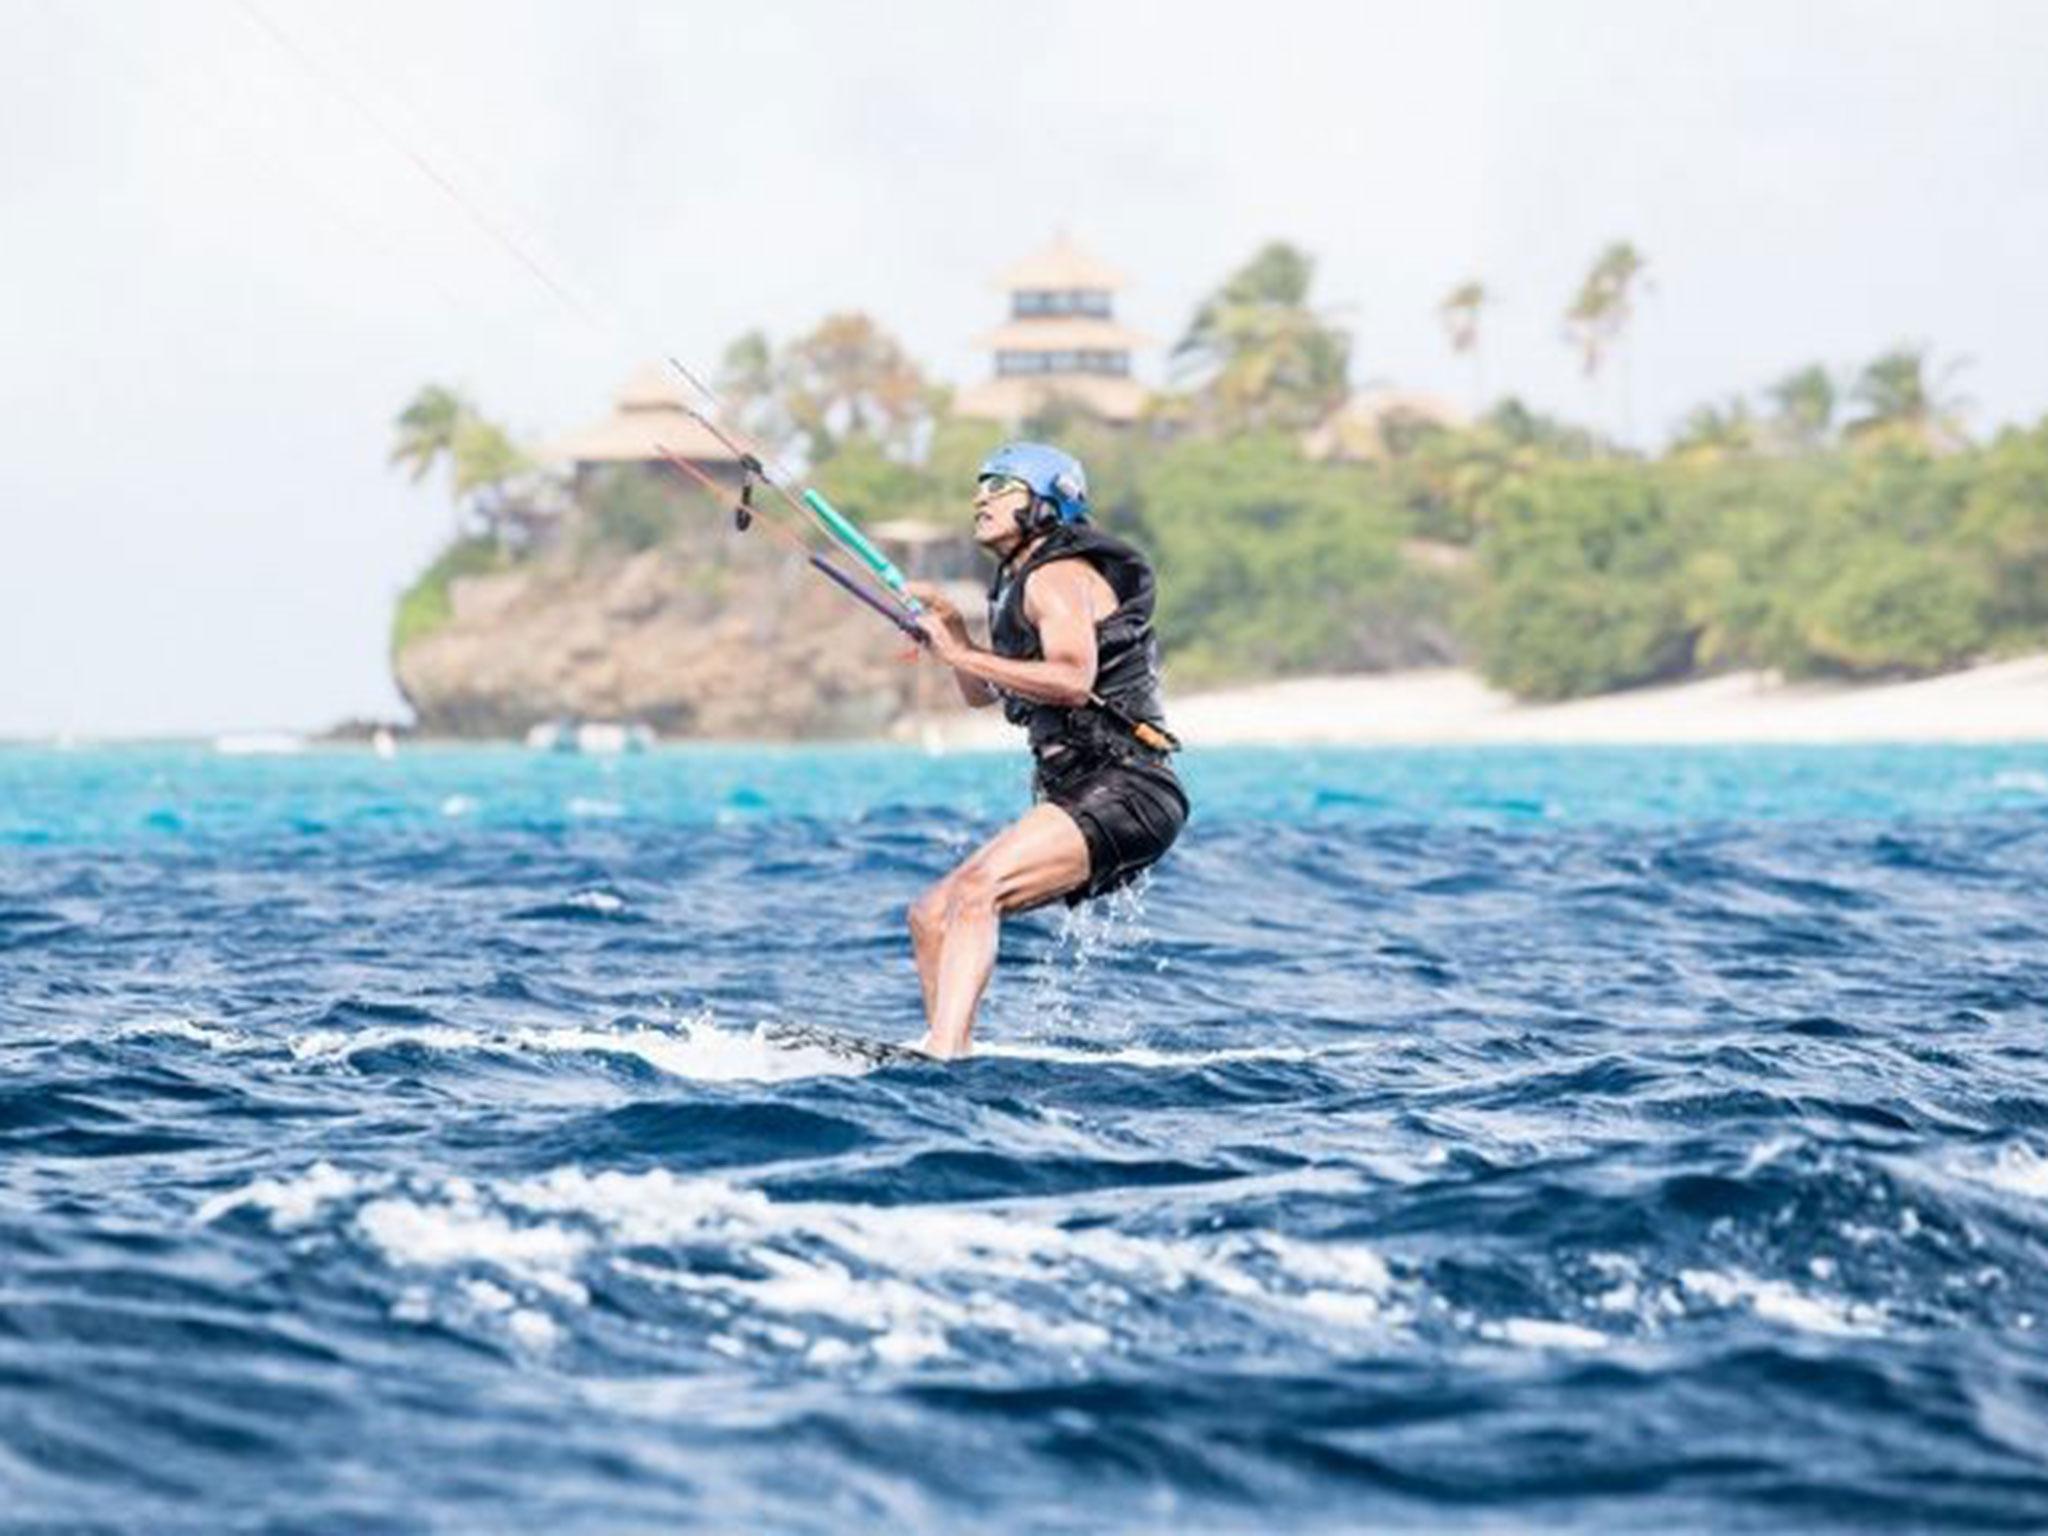 The former President tries his hand at kite surfing